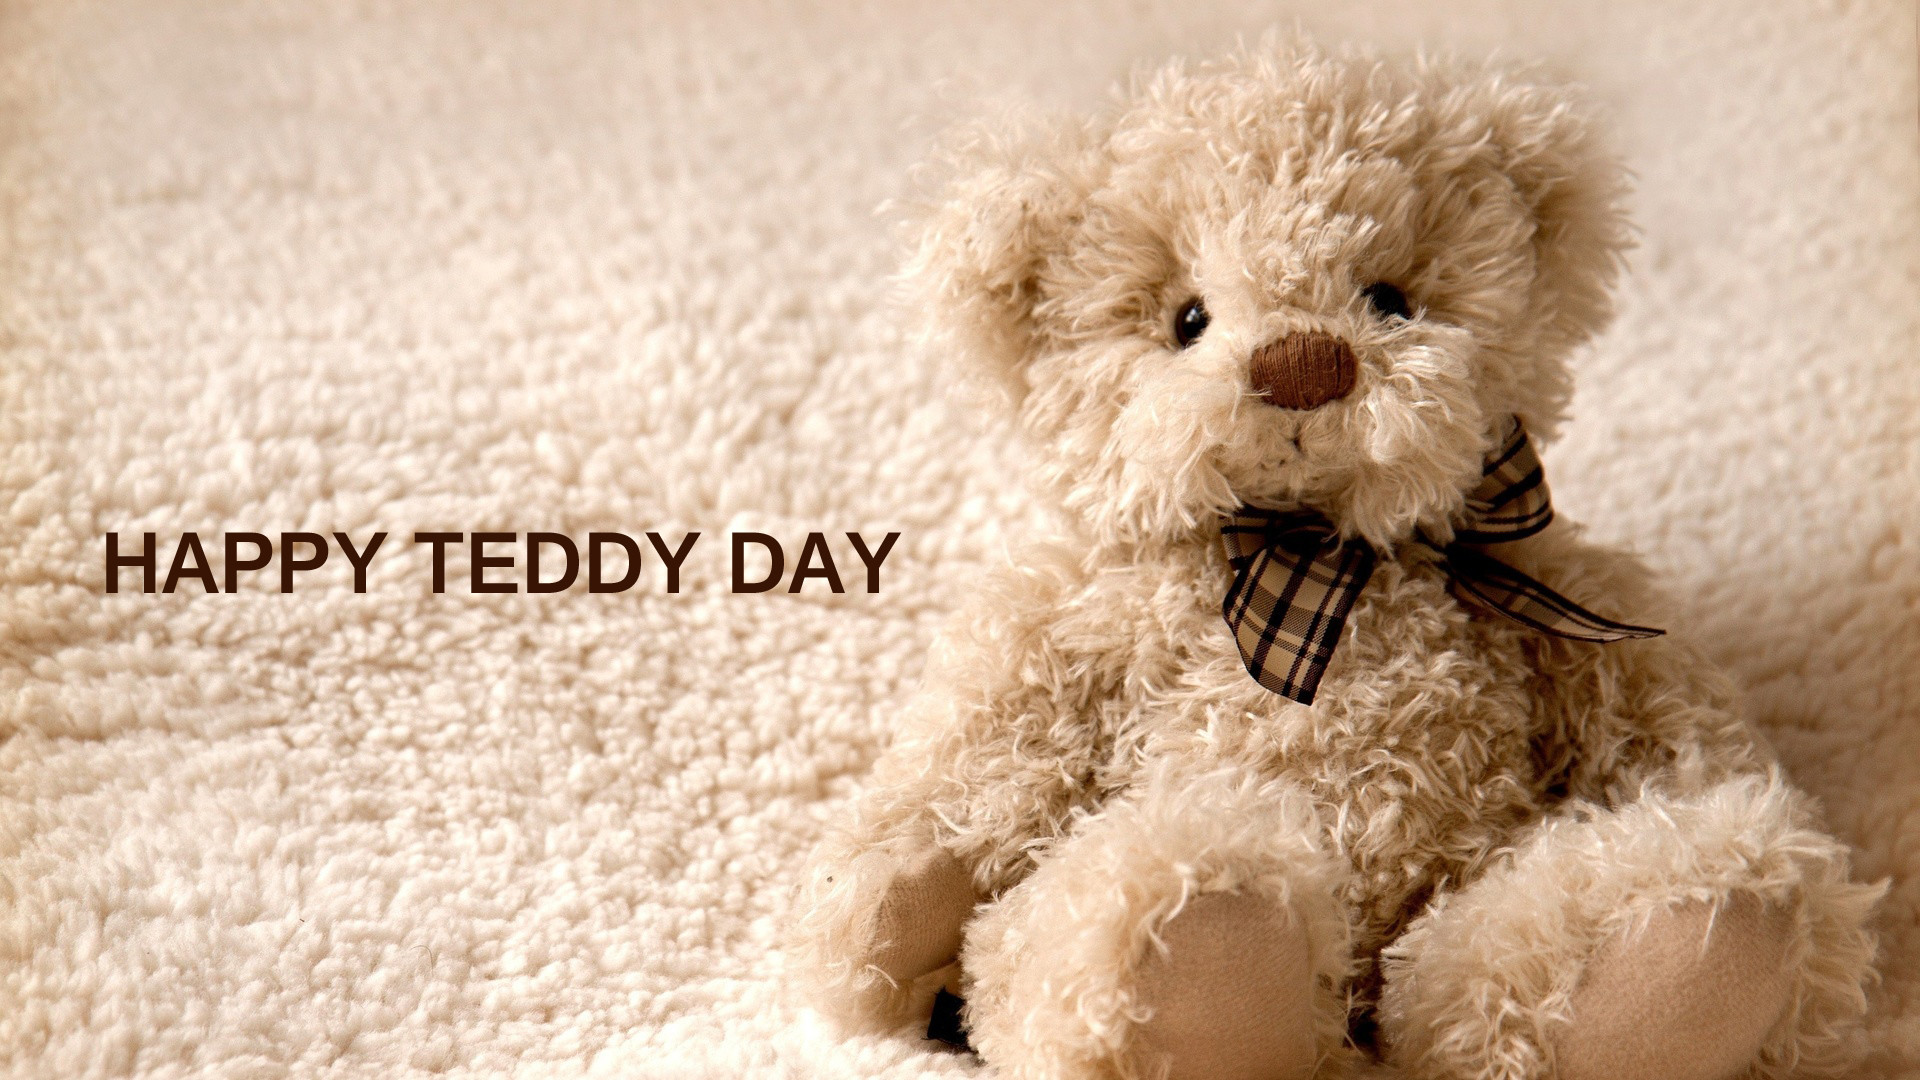 Teddy day image for bae